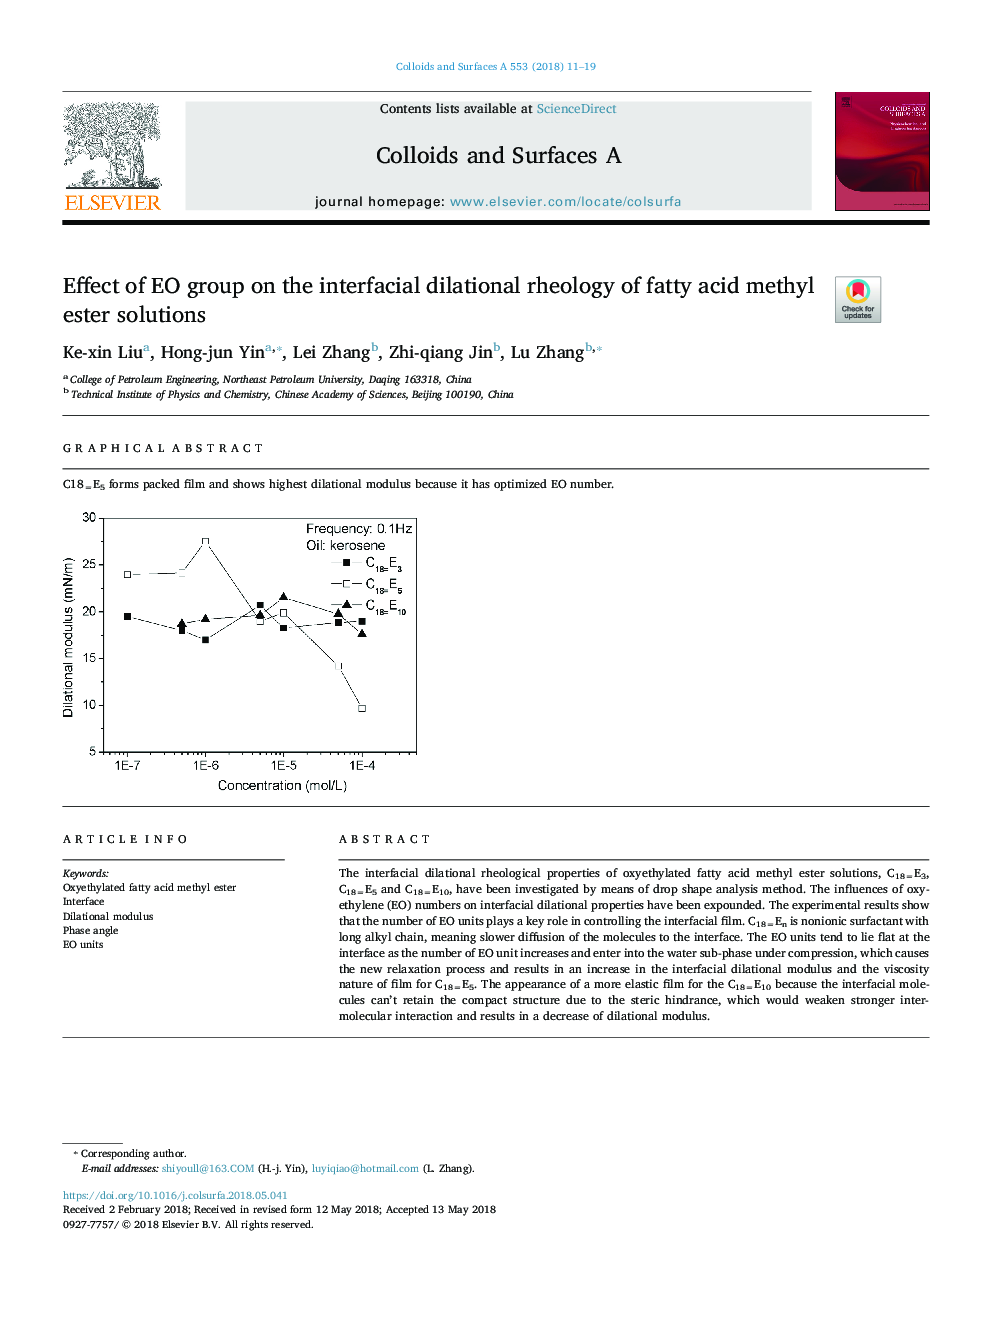 Effect of EO group on the interfacial dilational rheology of fatty acid methyl ester solutions